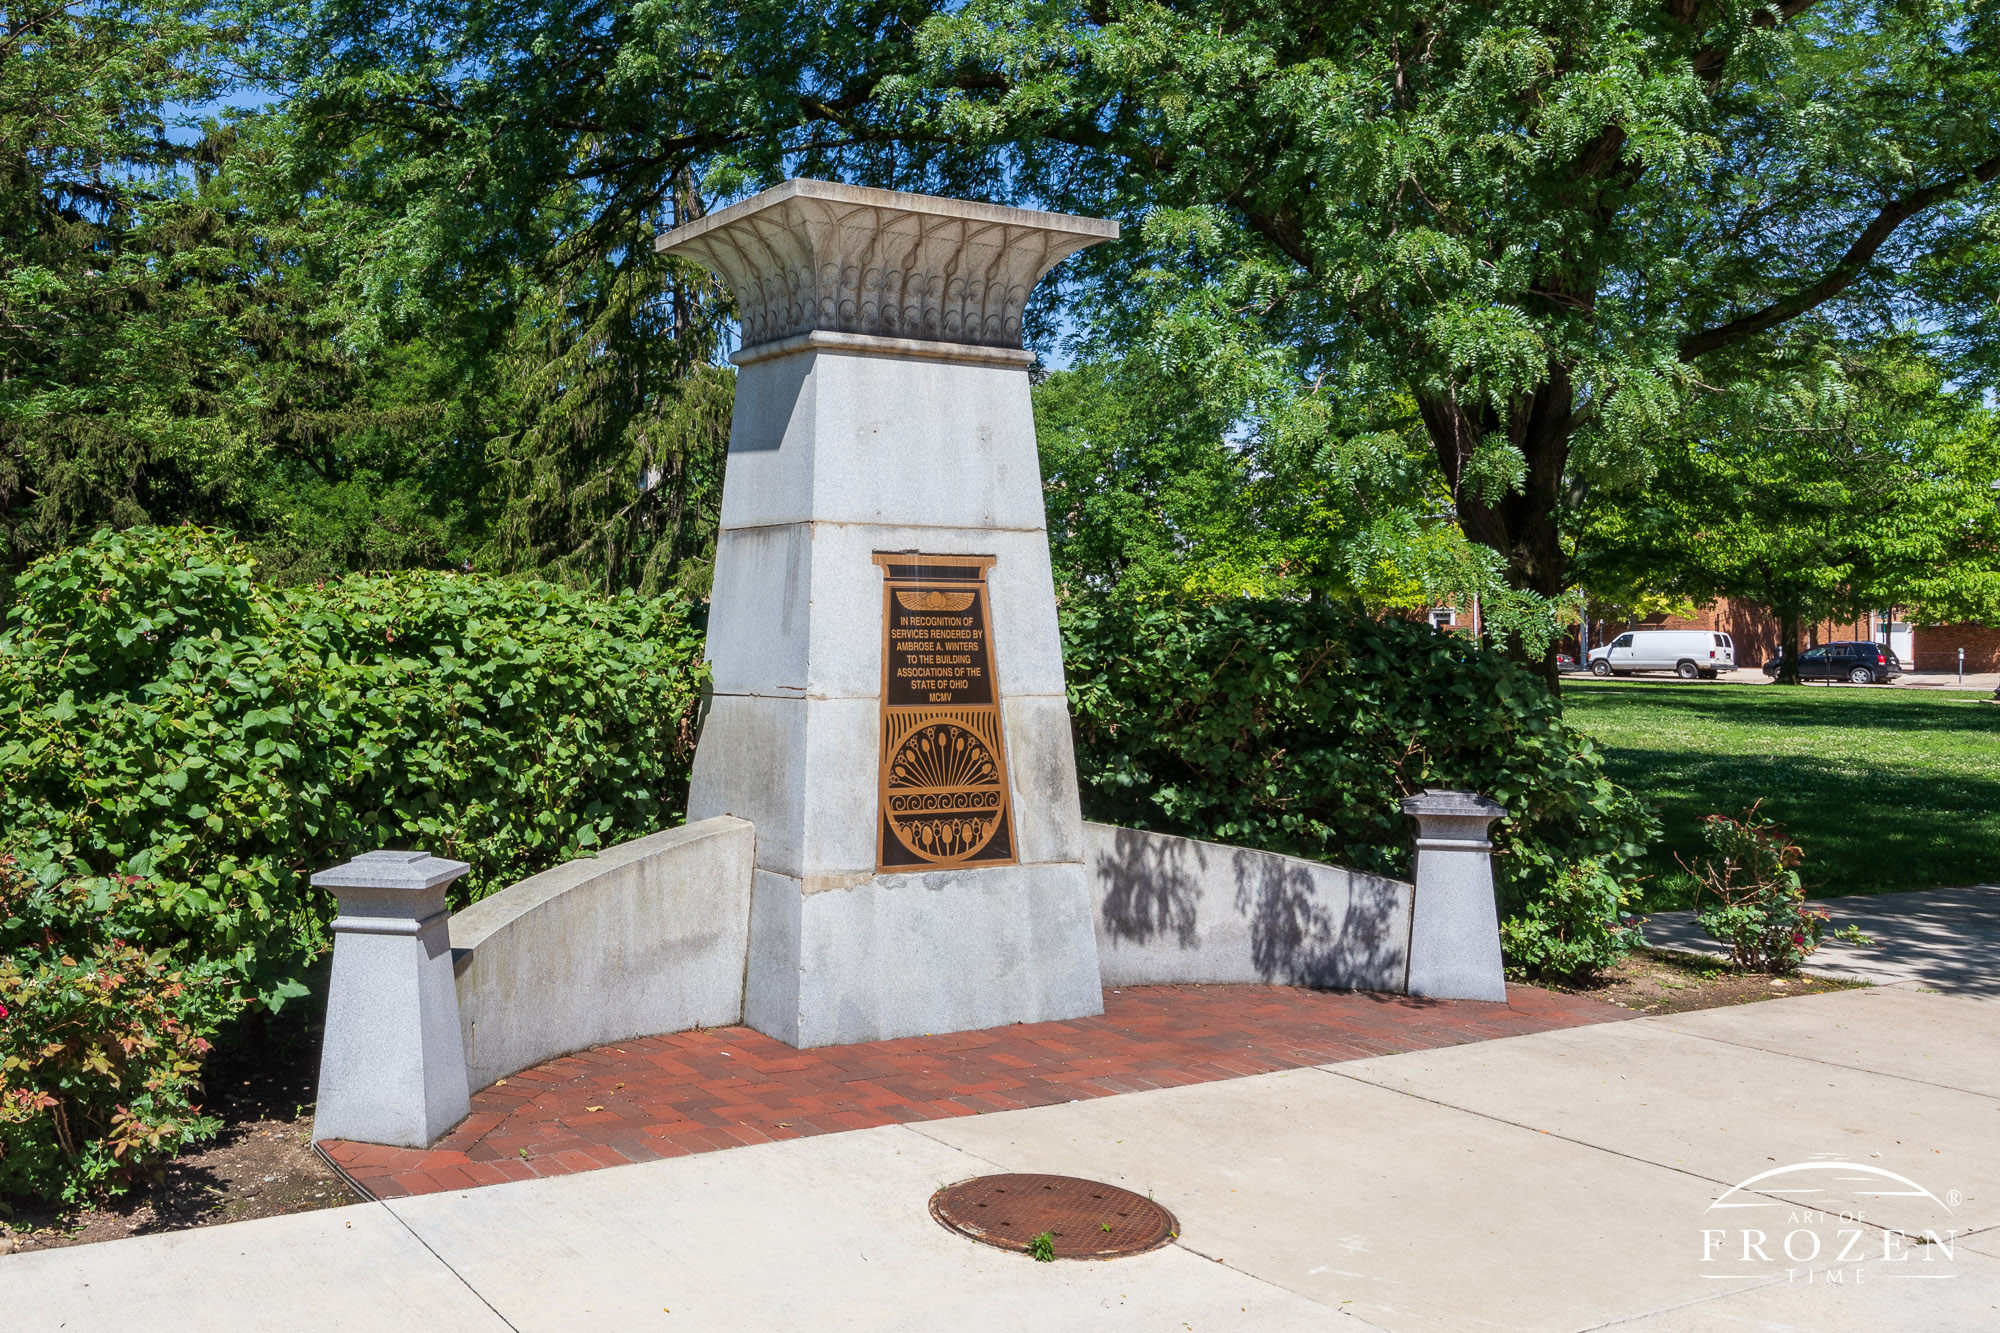 As Dayton revitalizes Patterson Boulevard, planners reinstalled this monument celebrated the city’s original advocate for better streetscape.